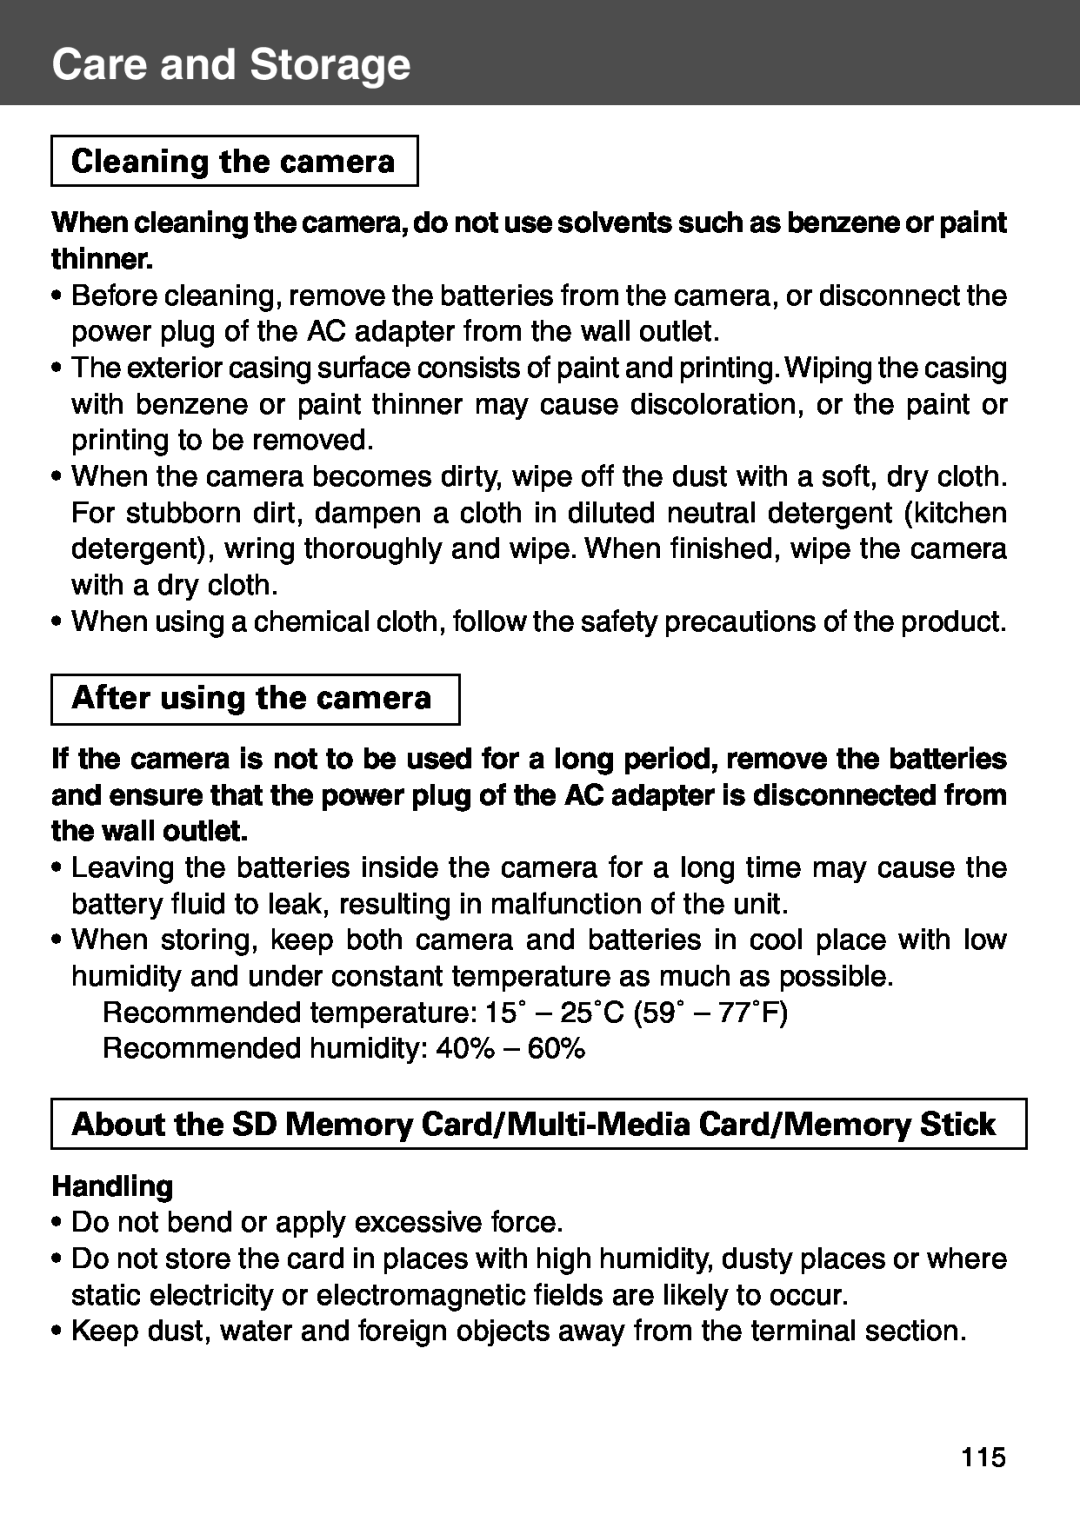 Konica Minolta KD-500Z user manual Care and Storage, Cleaning the camera, After using the camera, Handling 